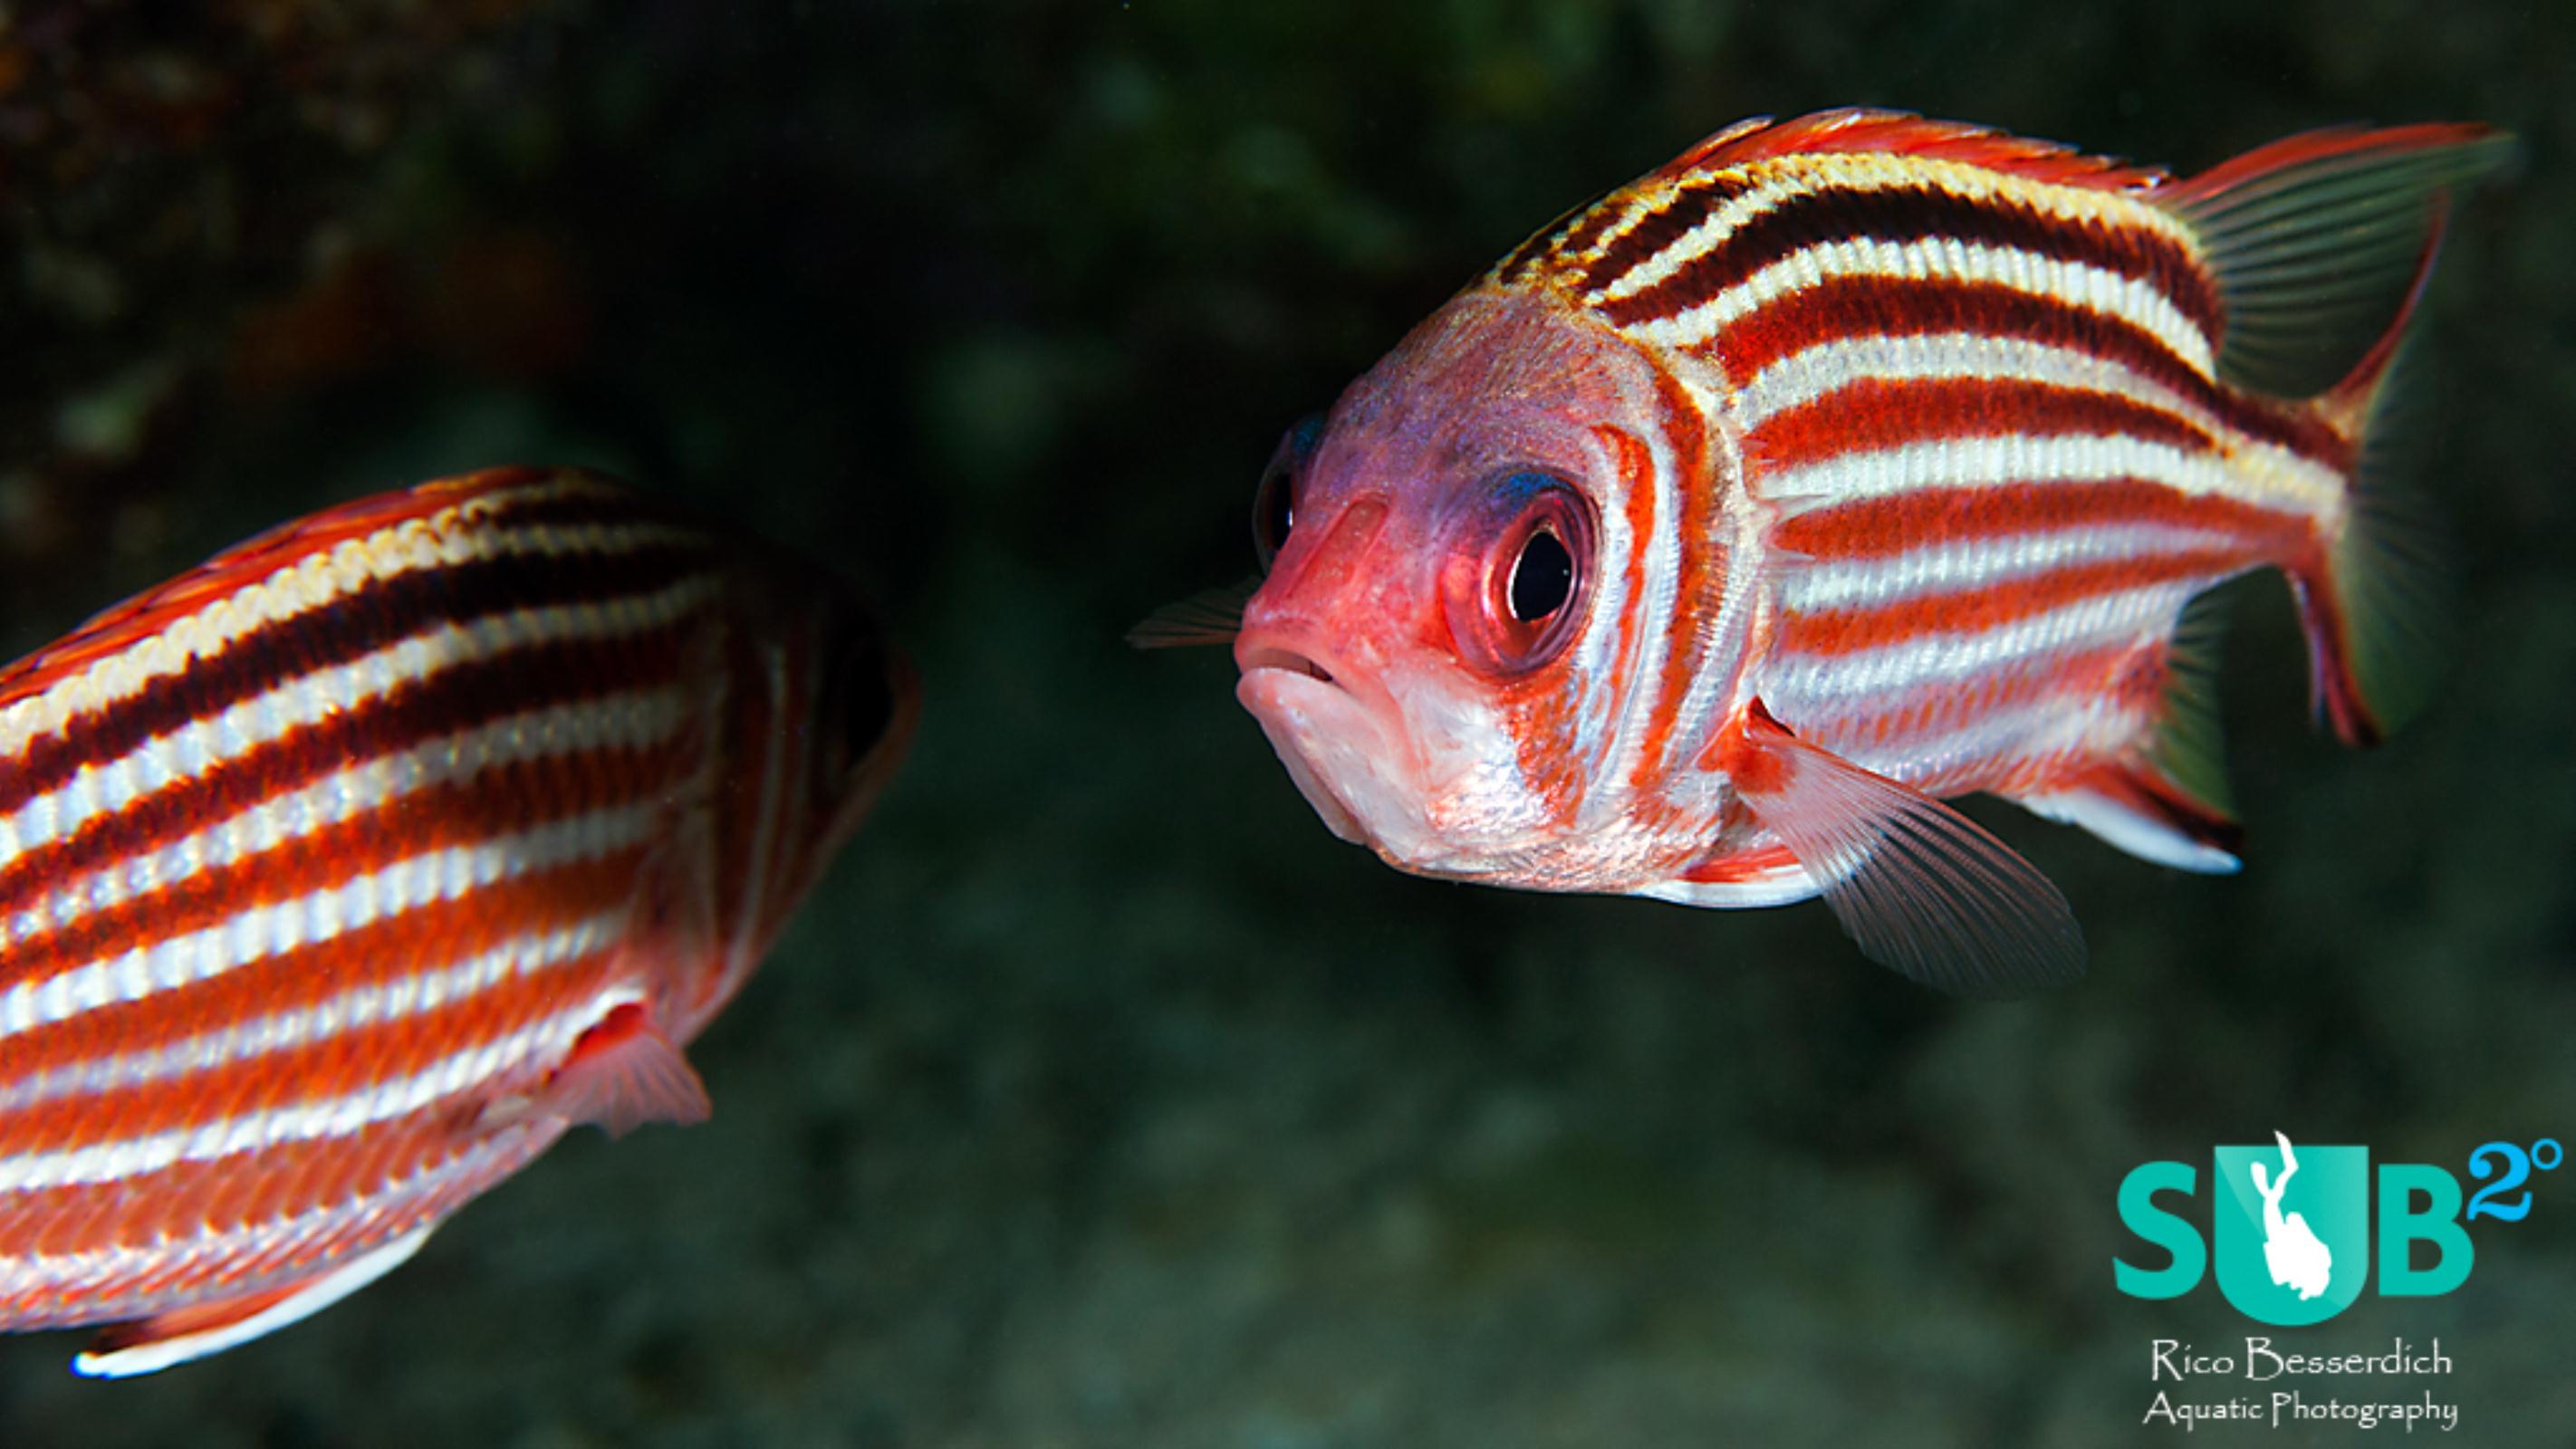 One soldierfish on the run, the other is posing nicely. Which one looks better?